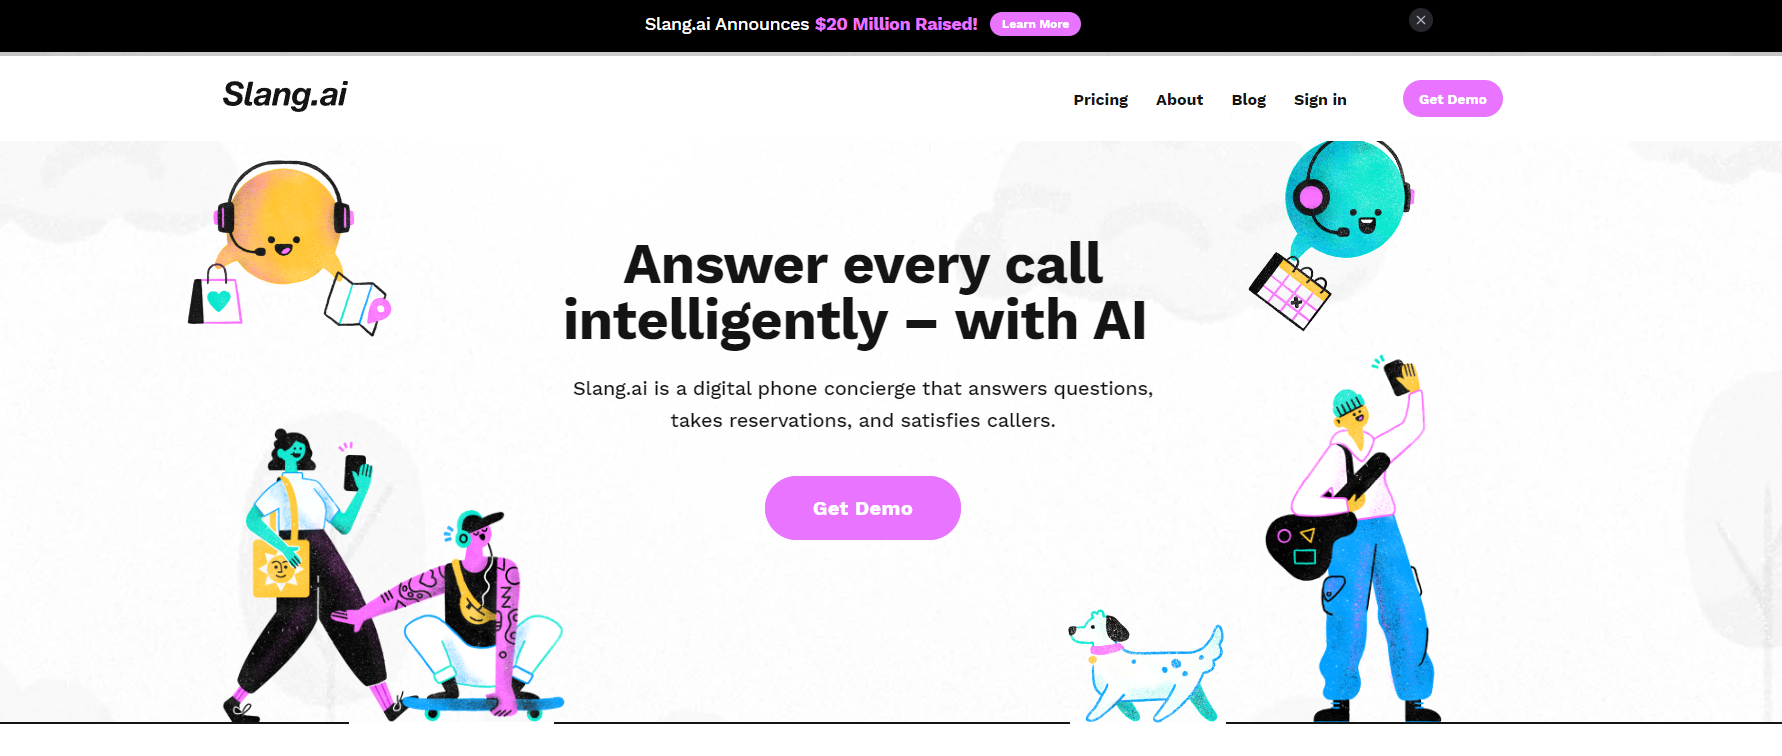 Raising over $20M, Slang.ai is revolutionizing the way we experience phone calls.